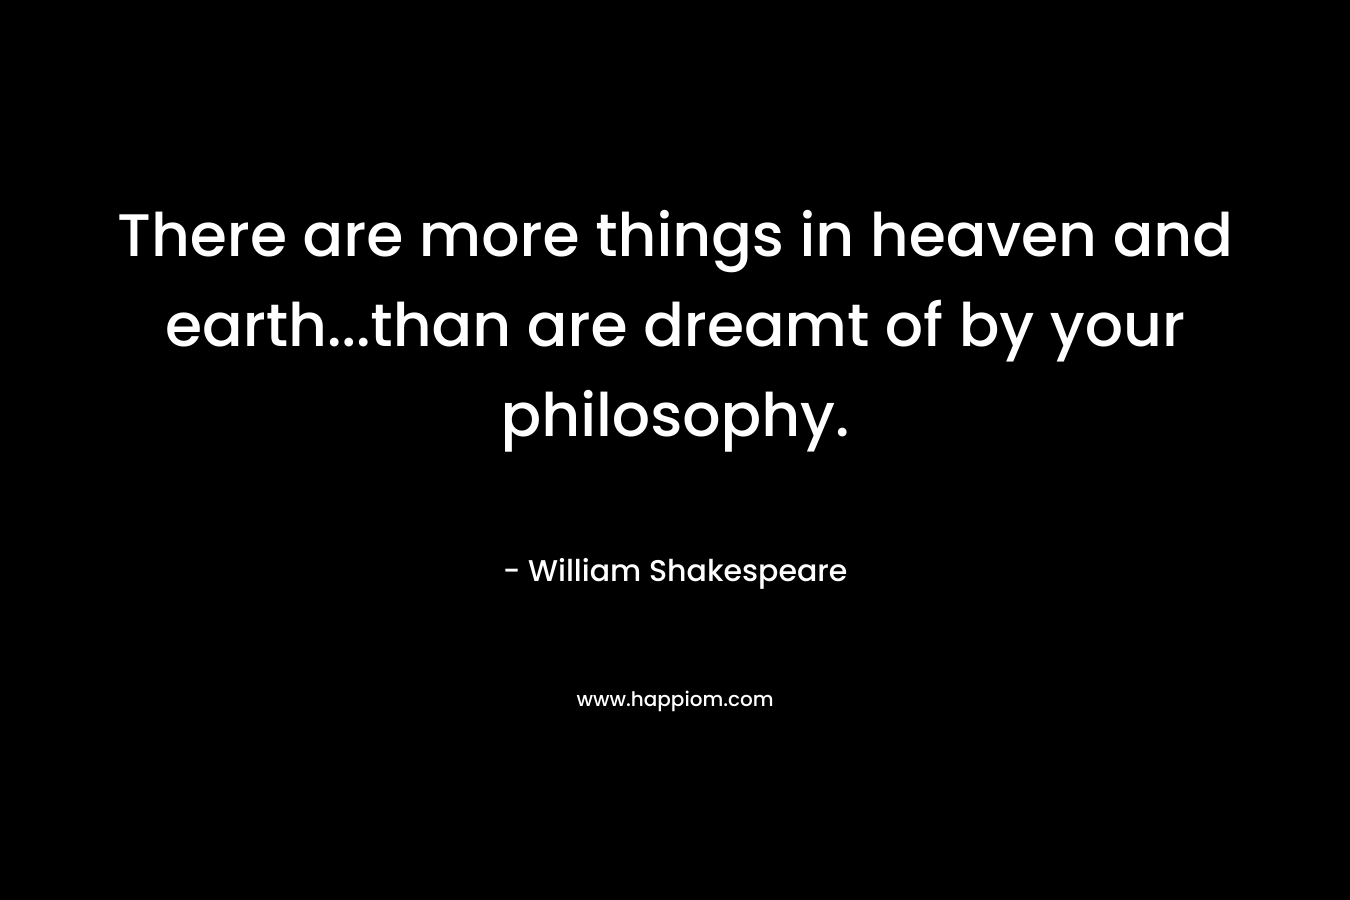 There are more things in heaven and earth...than are dreamt of by your philosophy.